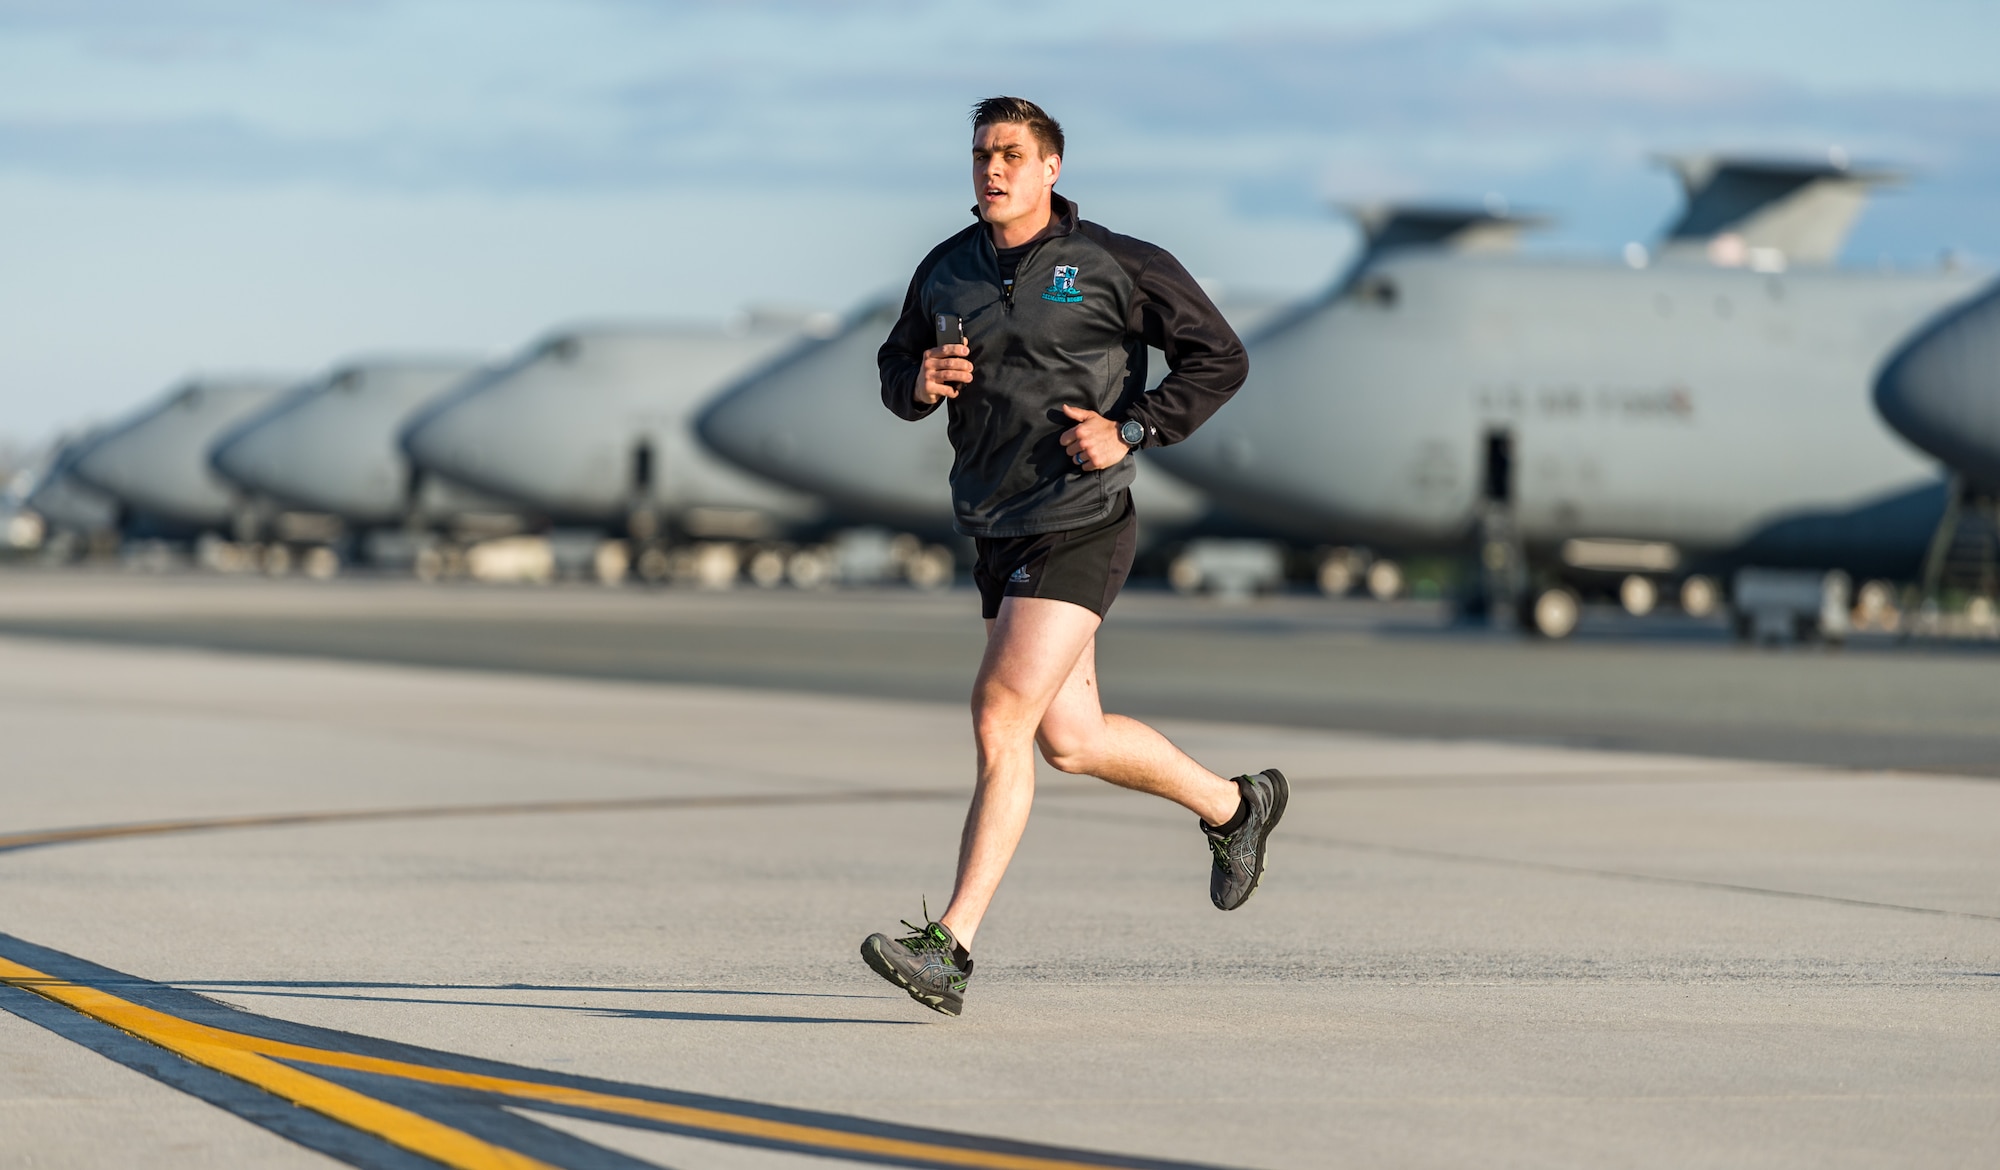 Staff Sgt. Timothy Clayton-Cornell, 736th Aircraft Maintenance Squadron flying crew chief, runs toward the finish line during the Wingman Day 2.25-mile run the runway event on Dover Air Force Base, Delaware, April 16, 2021. The run was one of more than 20 different events held to promote physical and mental resilience. (U.S. Air Force photo by Roland Balik)